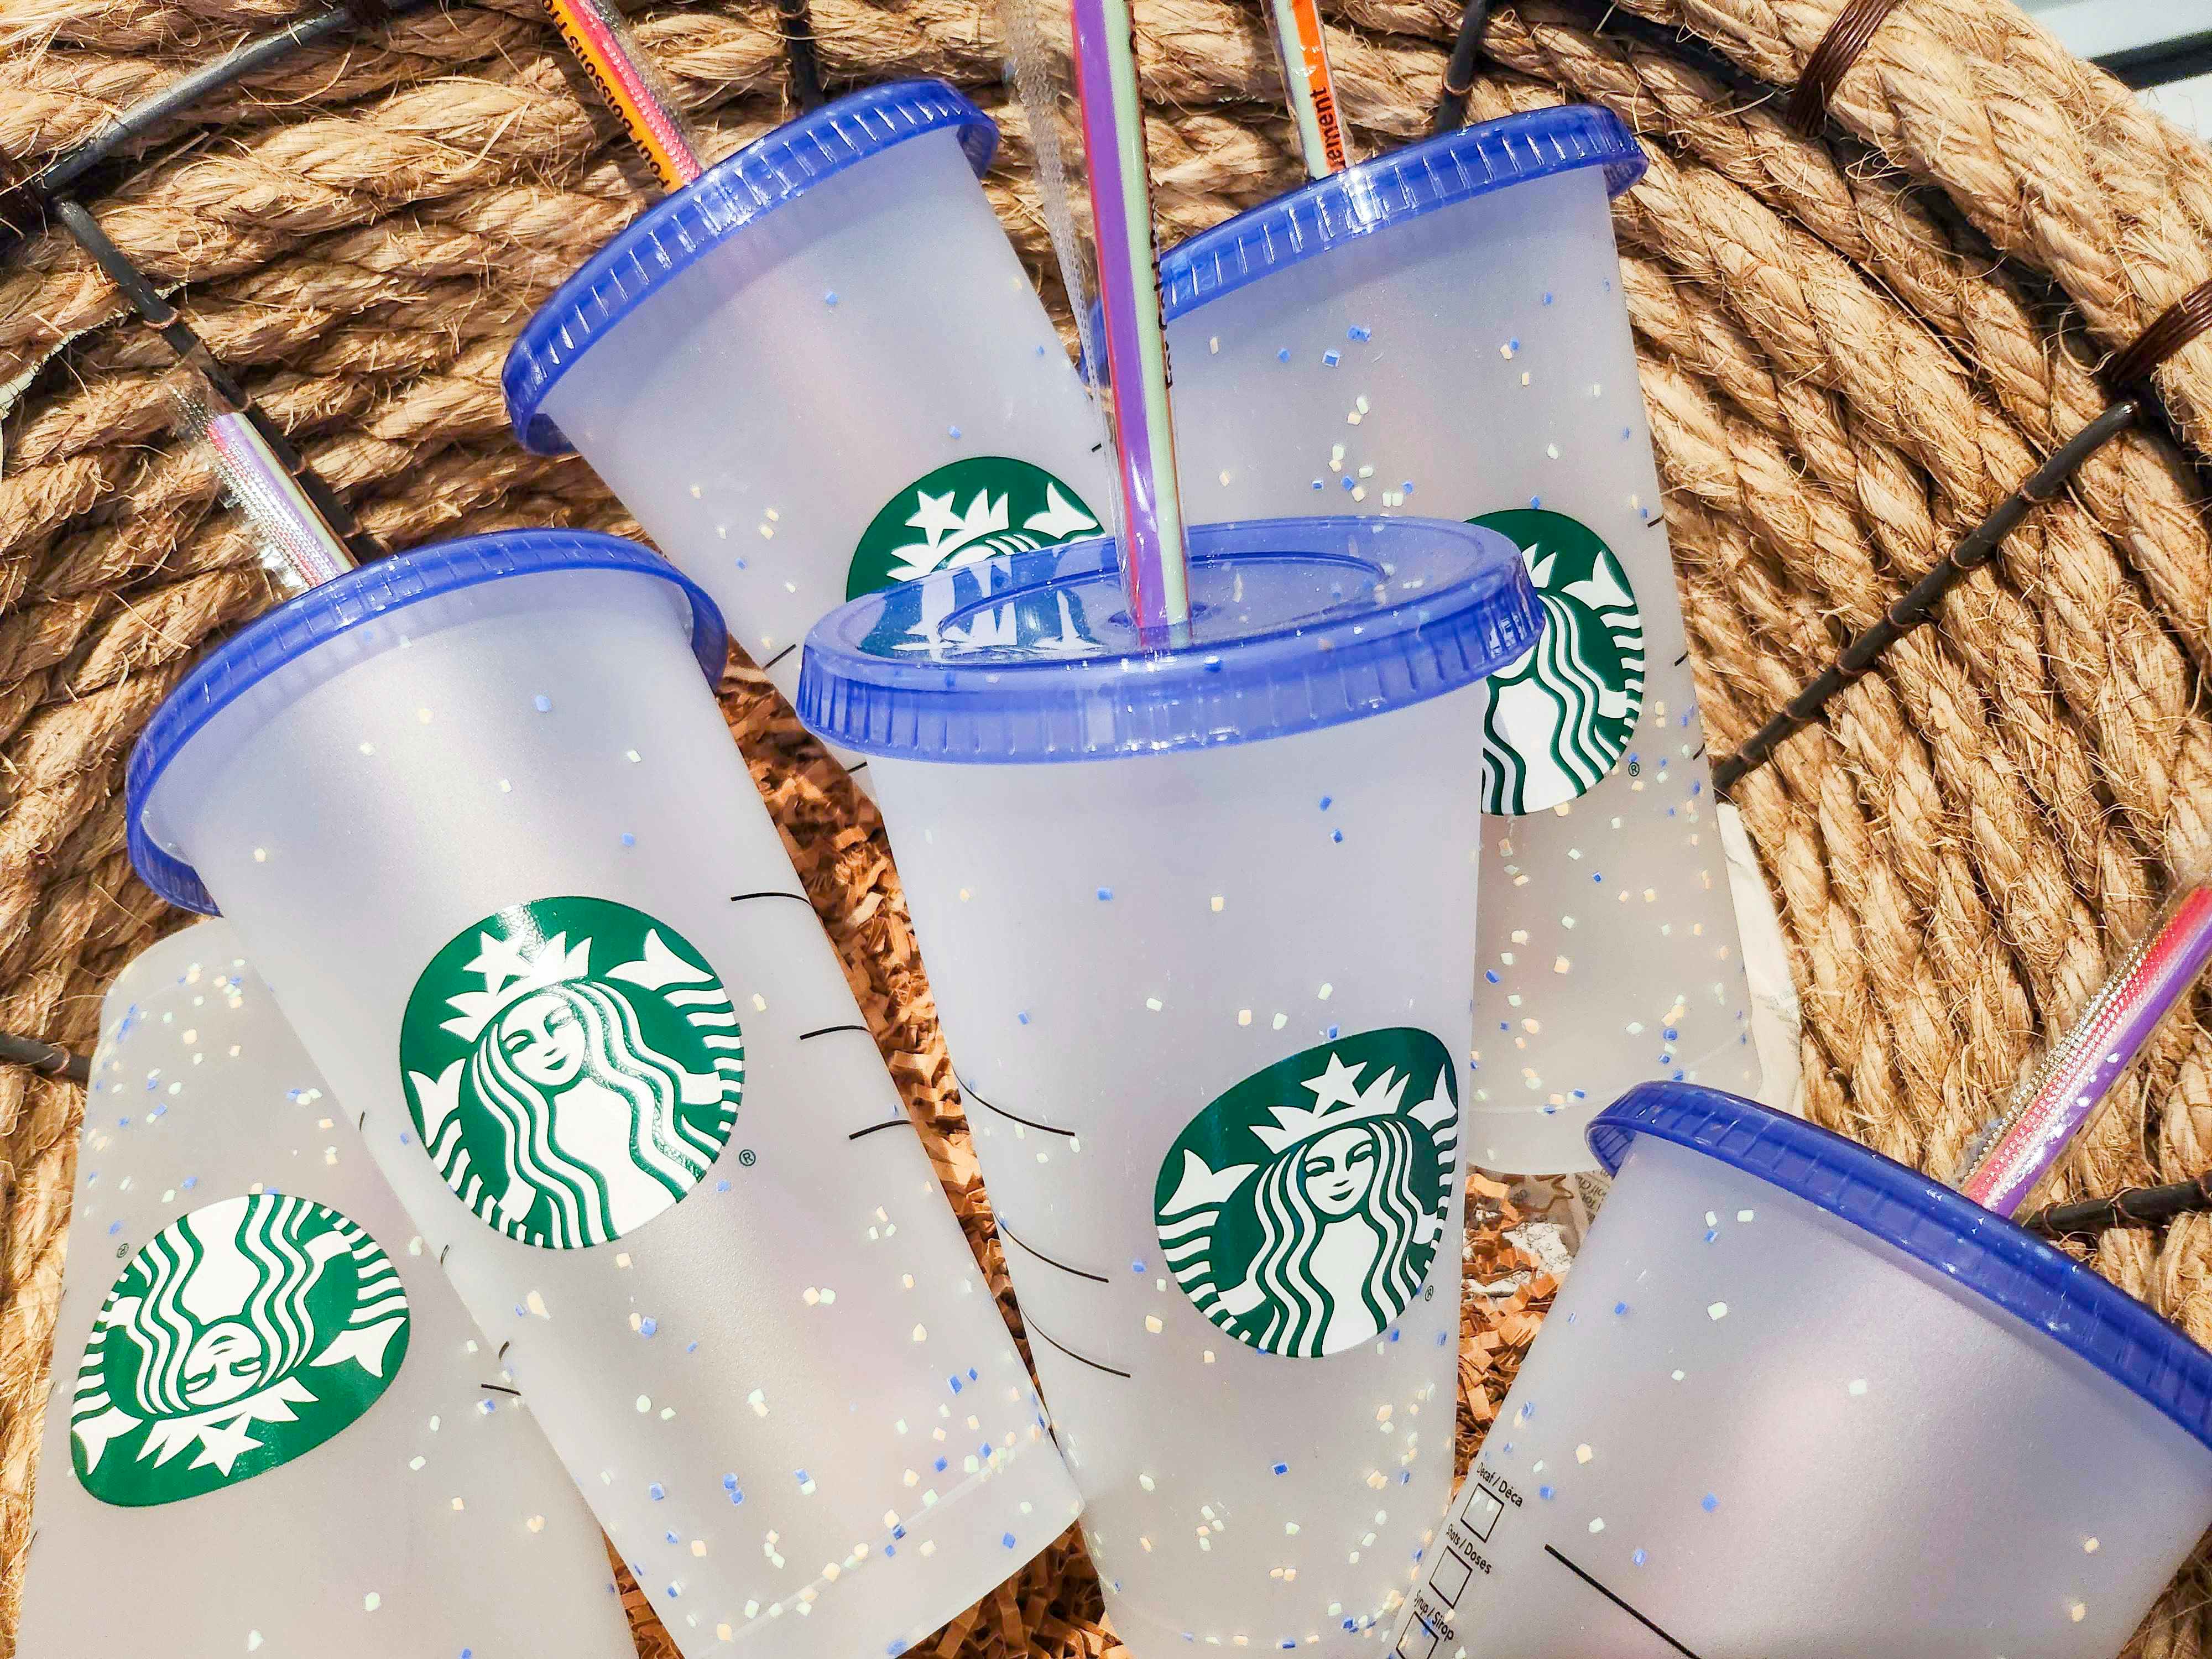 https://prod-cdn-thekrazycouponlady.imgix.net/wp-content/uploads/2023/04/starbucks-summer-cups-purple-confetti-cold-cup-1683558995-1683558995.jpg?auto=format&fit=fill&q=25